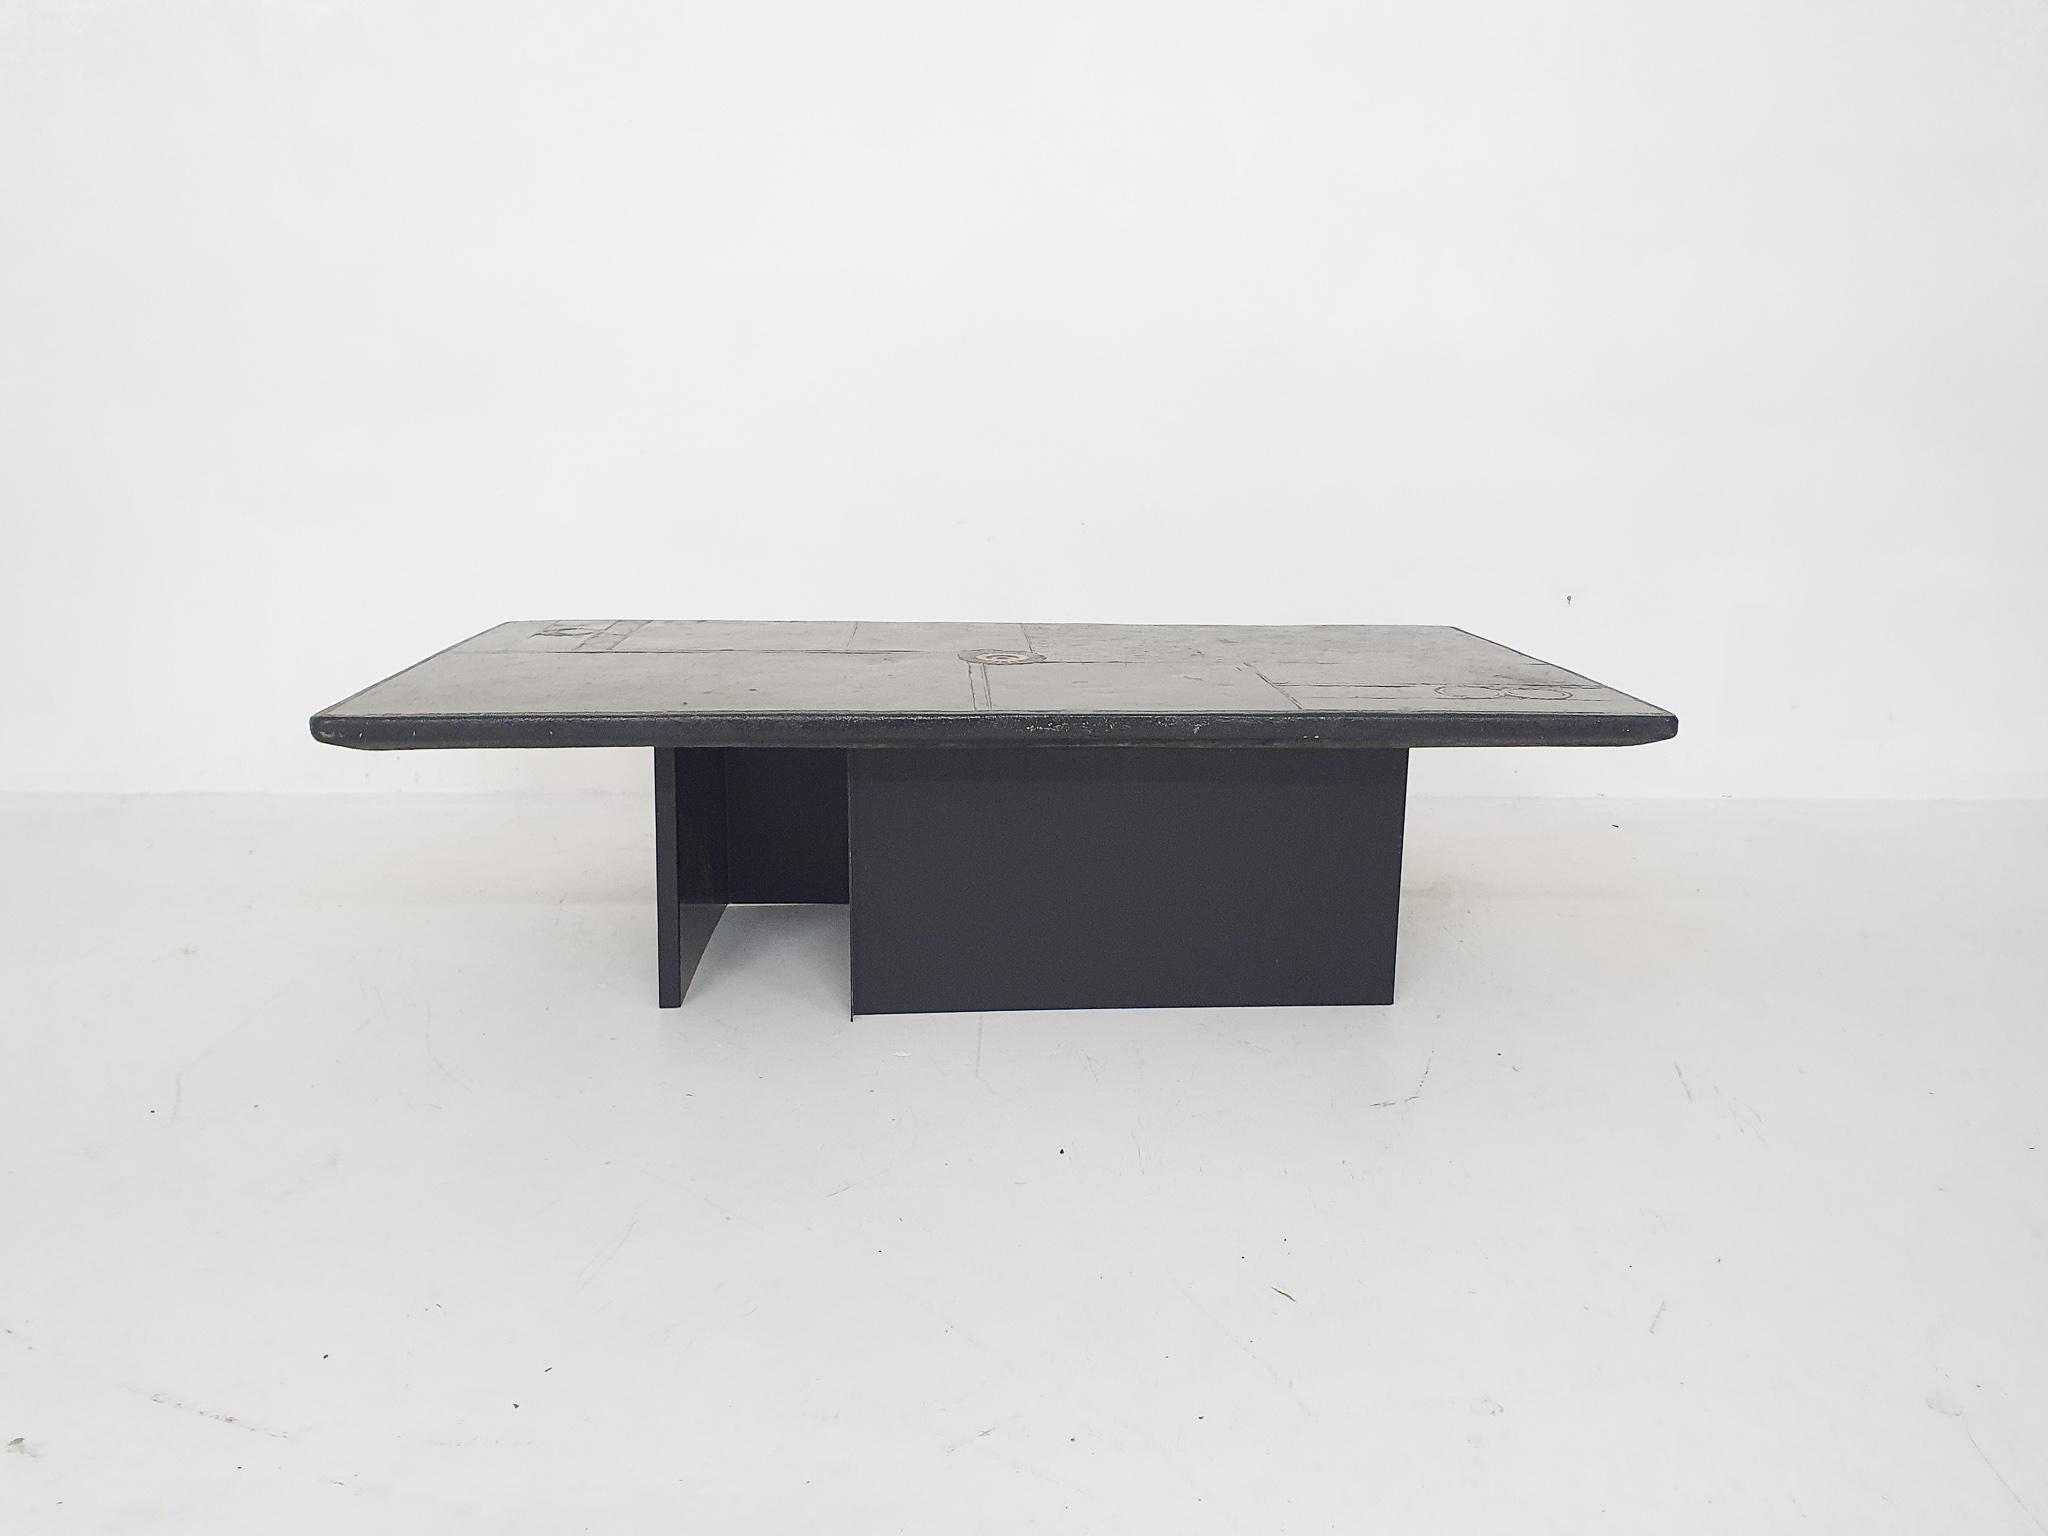 Stone coffee table on two L-shaped metal plates. We think it is the design of Marcus or Paul Kingma, only the top has no mark.